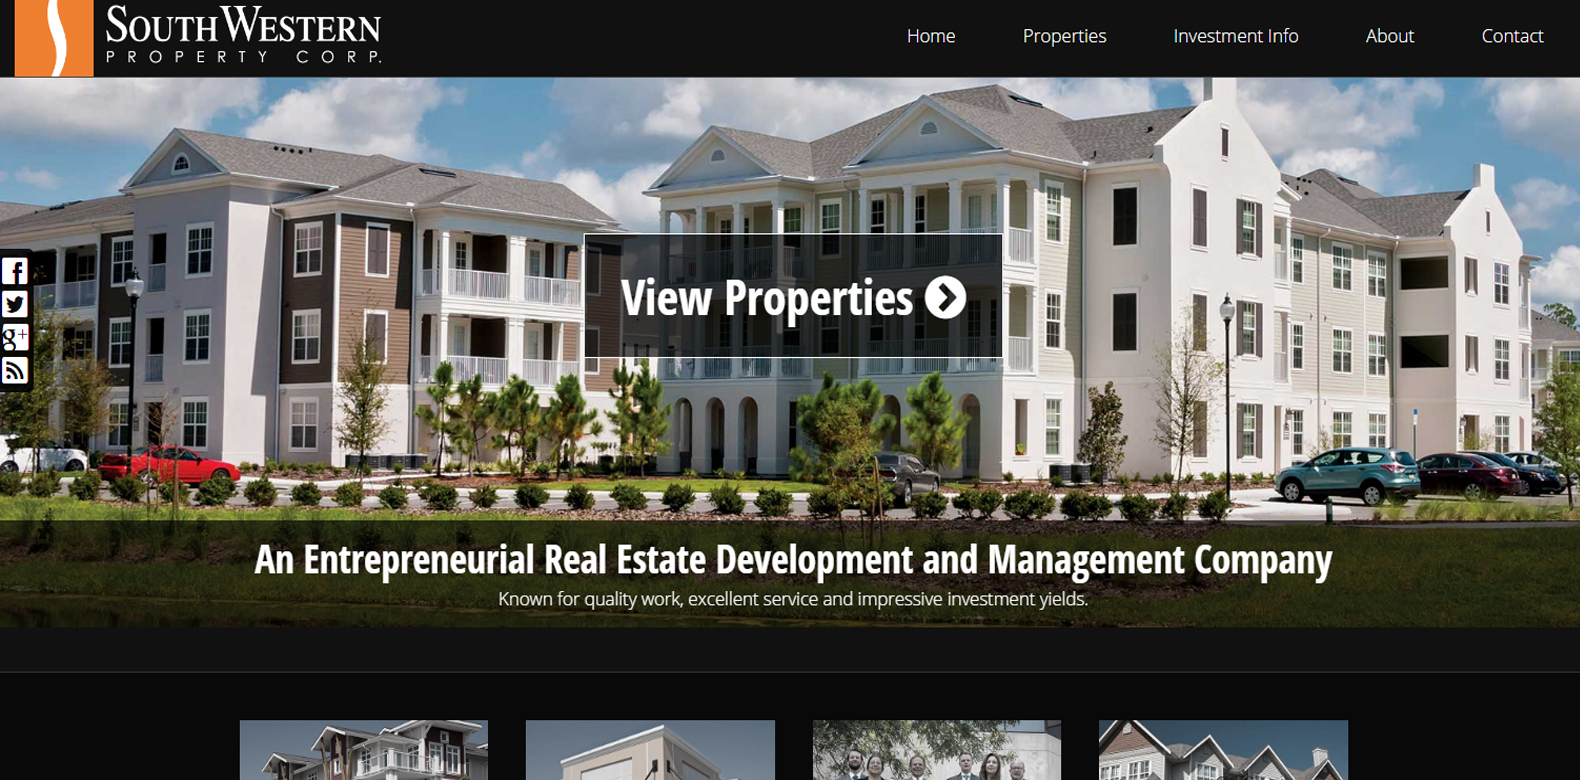 
New Website Launch: SouthWestern Property Corp.